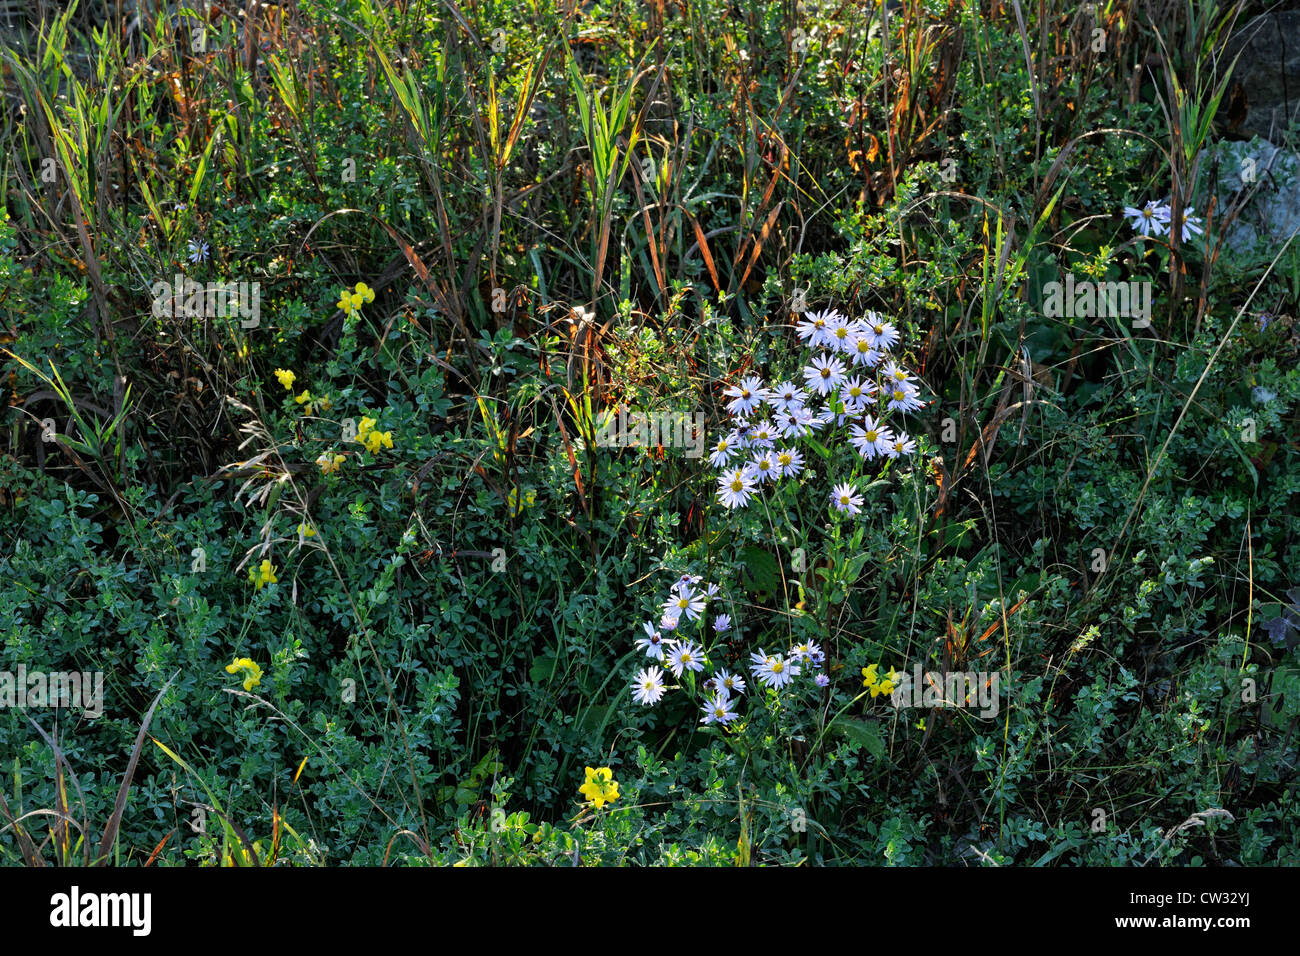 Aster flowers with morning dew, Greater Sudbury, Ontario, Canada Stock Photo